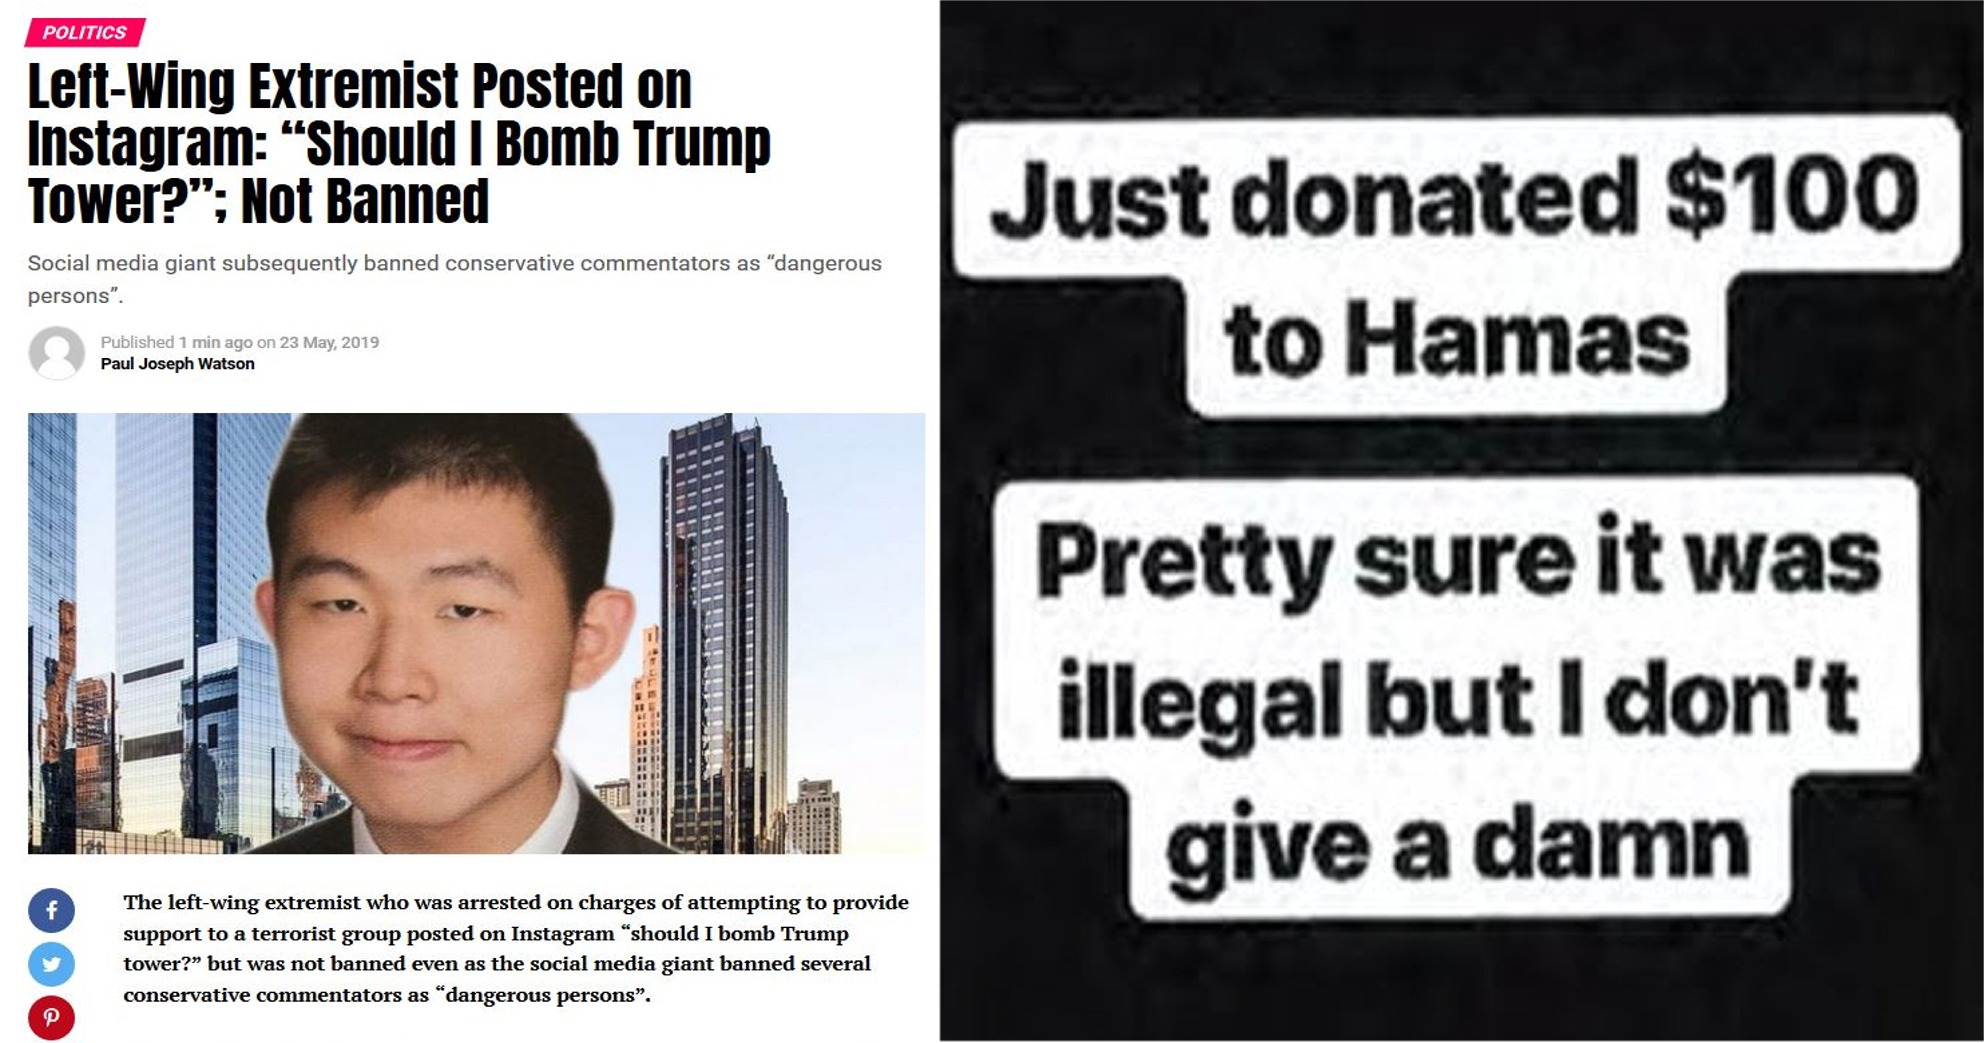 jonathan xie - Politics LeftWing Extremist Posted on Instagram Should I Bomb Trump Tower?"; Not Banned Social media giant subsequently banned conservative commentators as "dangerous persons". Just donated $100 to Hamas Published 1 min ago on Paul Joseph W